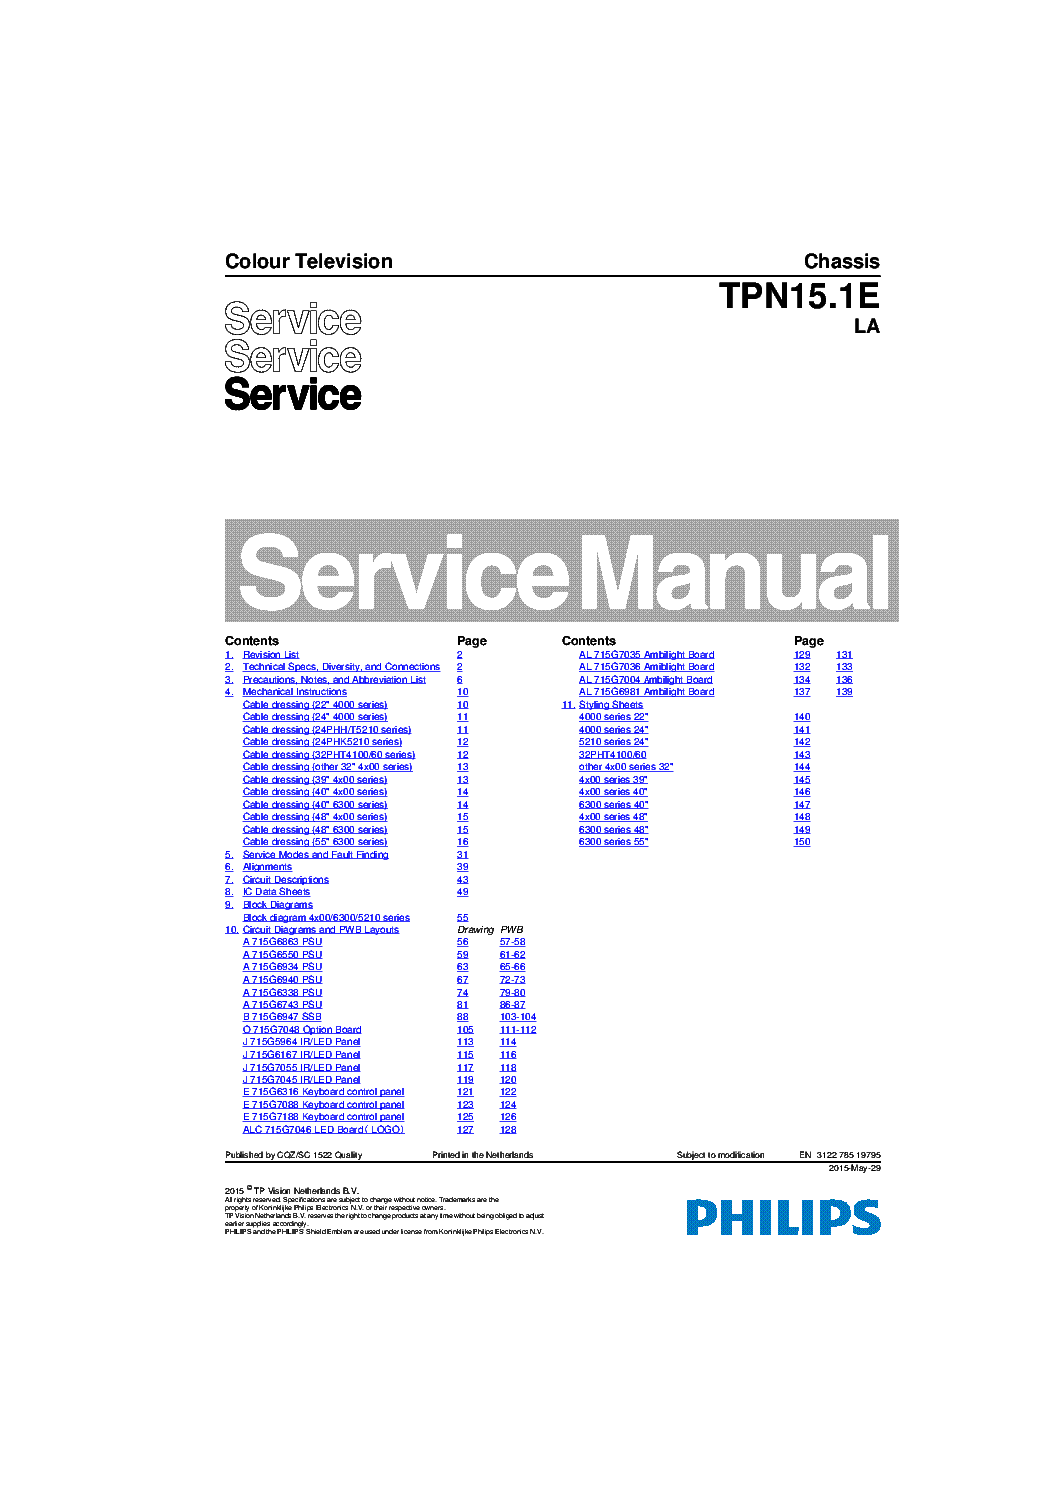 PHILIPS CHASSIS TPN15.1ELA SM service manual (1st page)